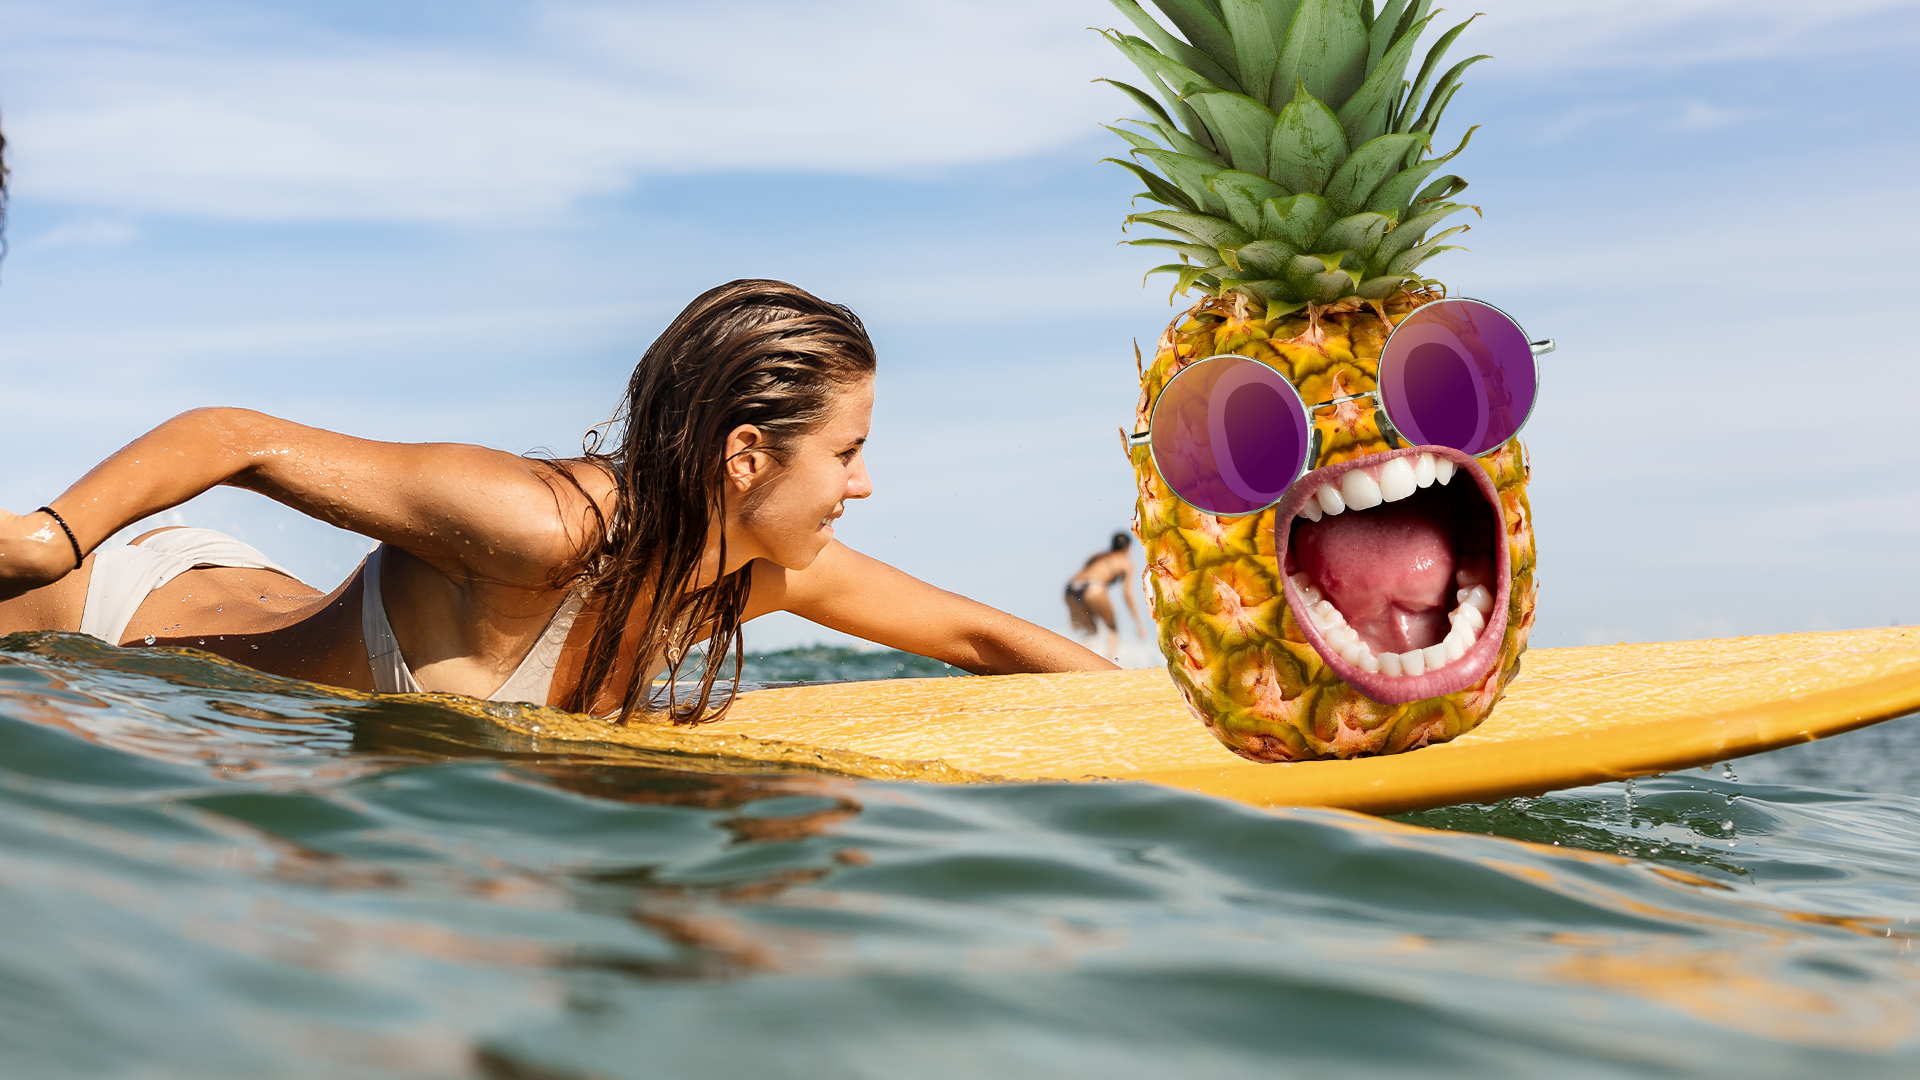 Woman surfing and screaming pineapple in sunglasses